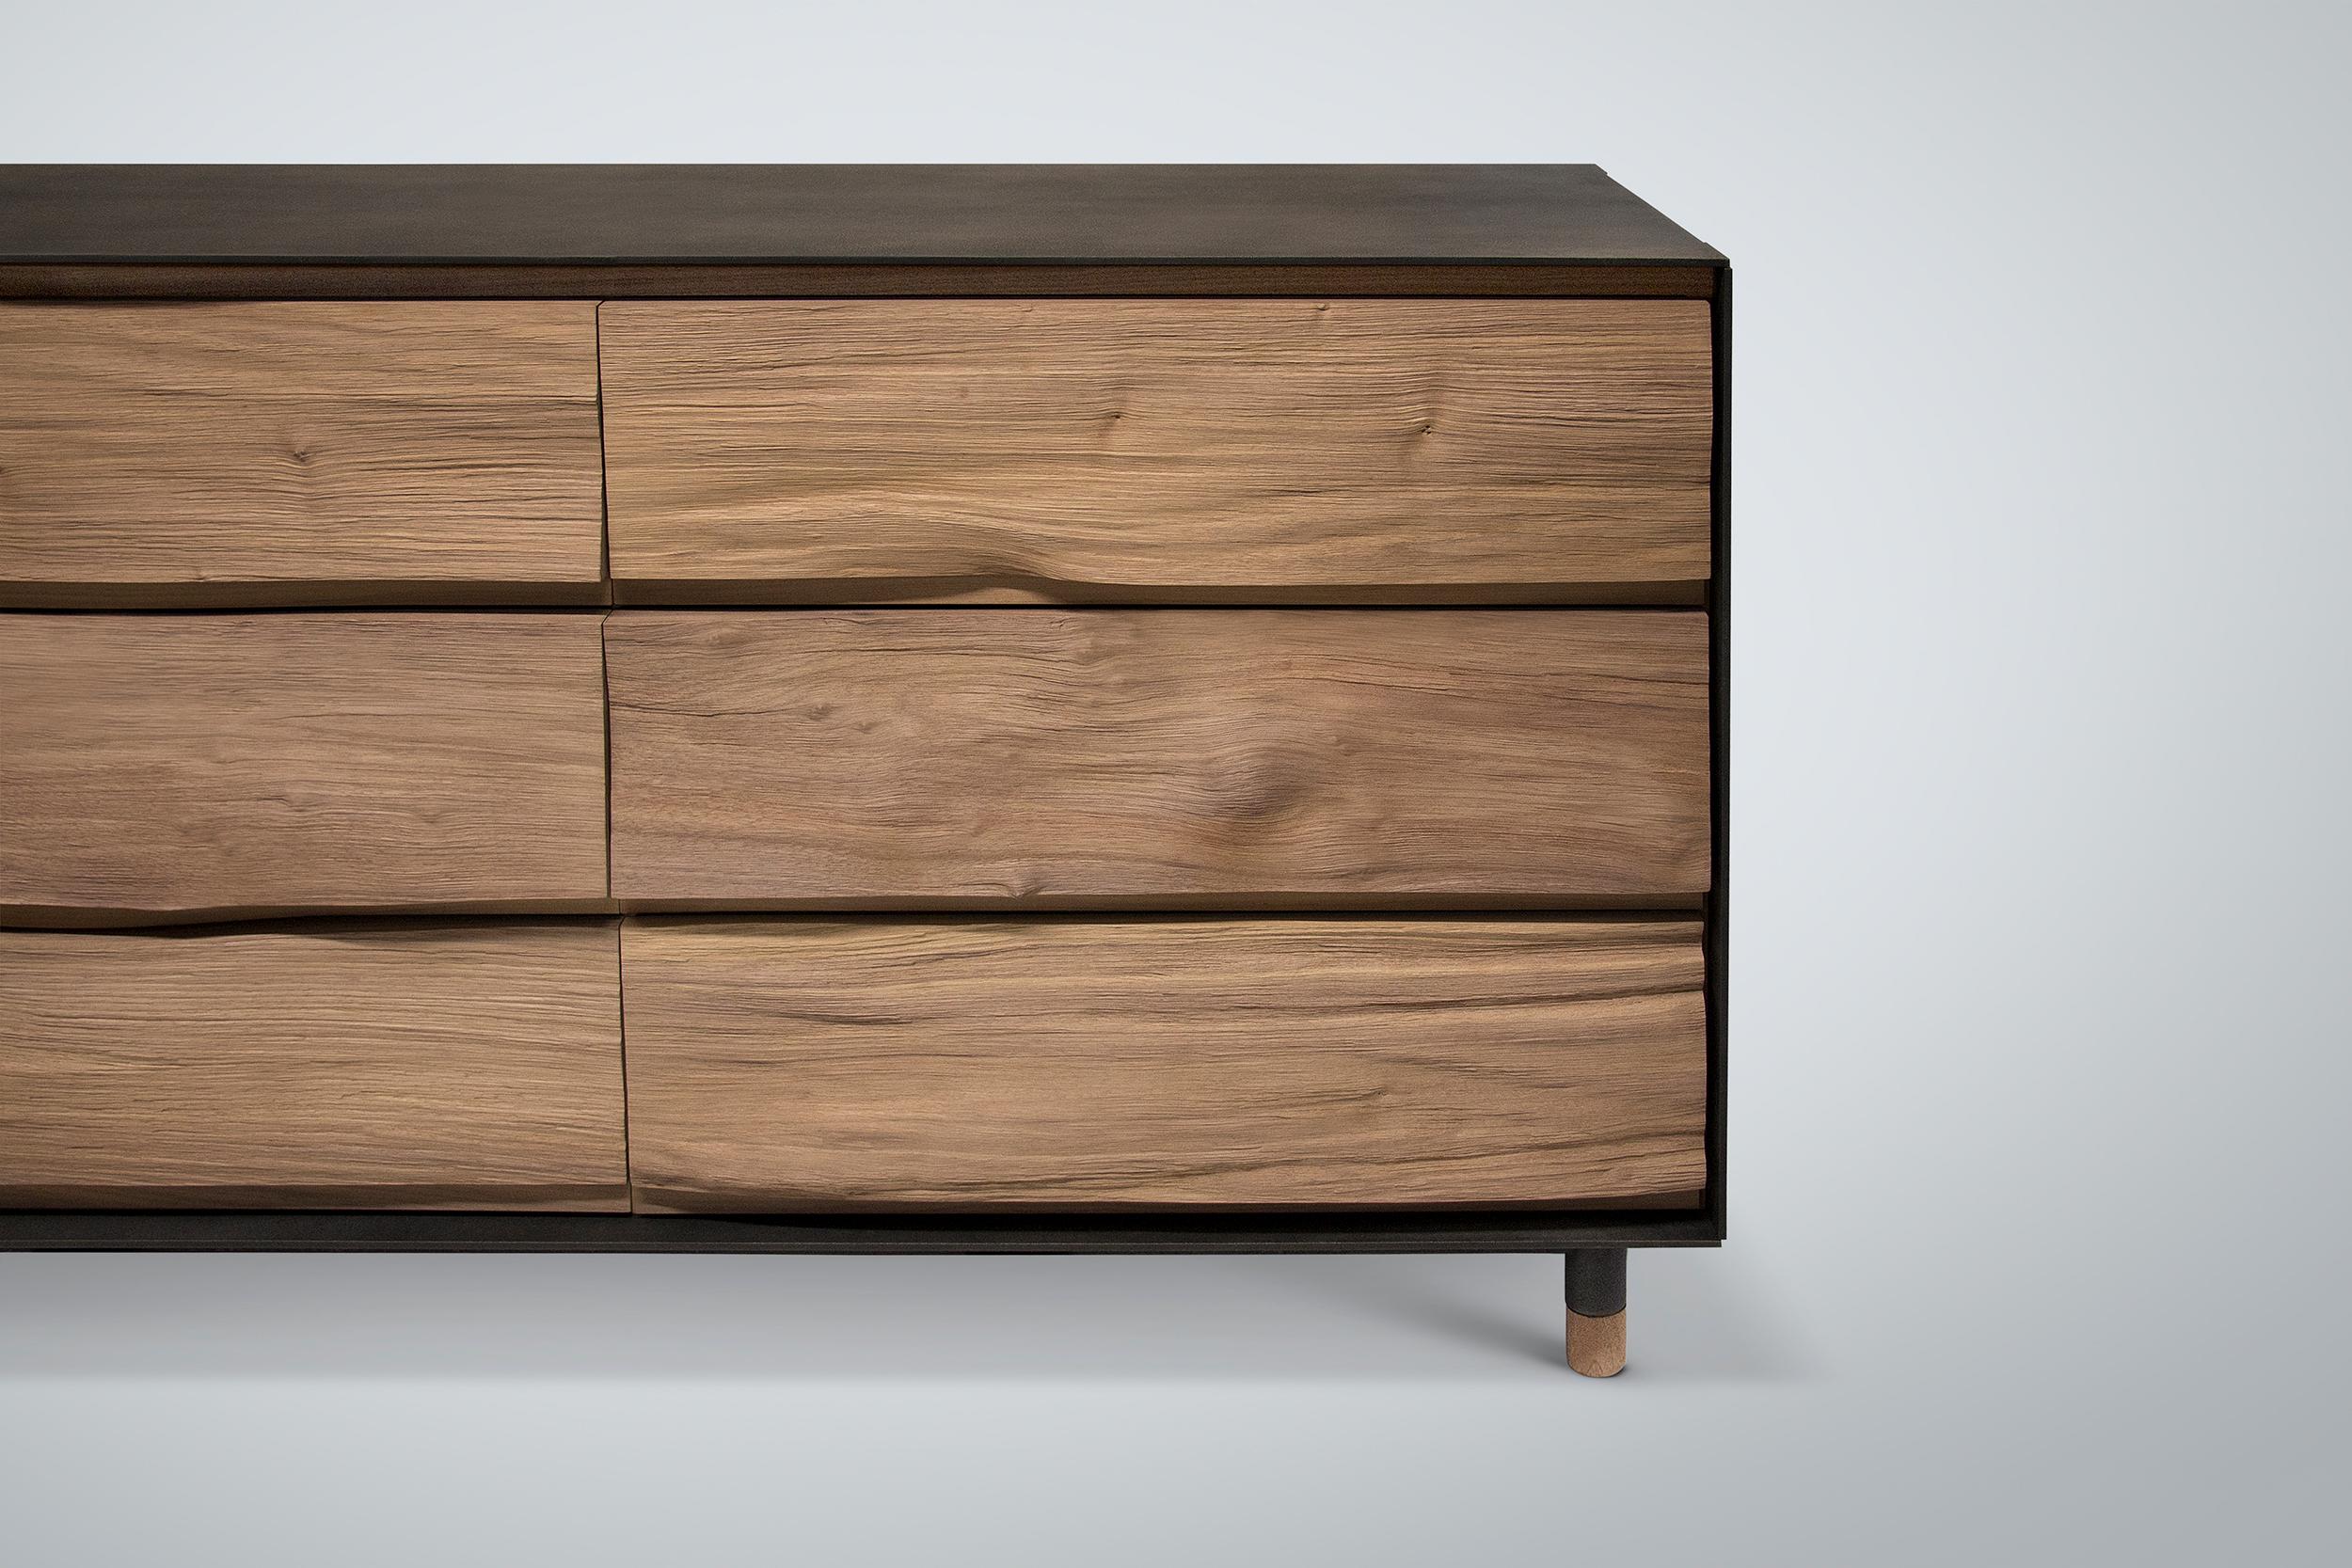 Our split walnut dresser features American black walnut drawer faces and a steel cladding surround that's textured with a mottled acid-etched pattern and finished with Japanese brown patina. The dresser rests on a welded steel base with matching